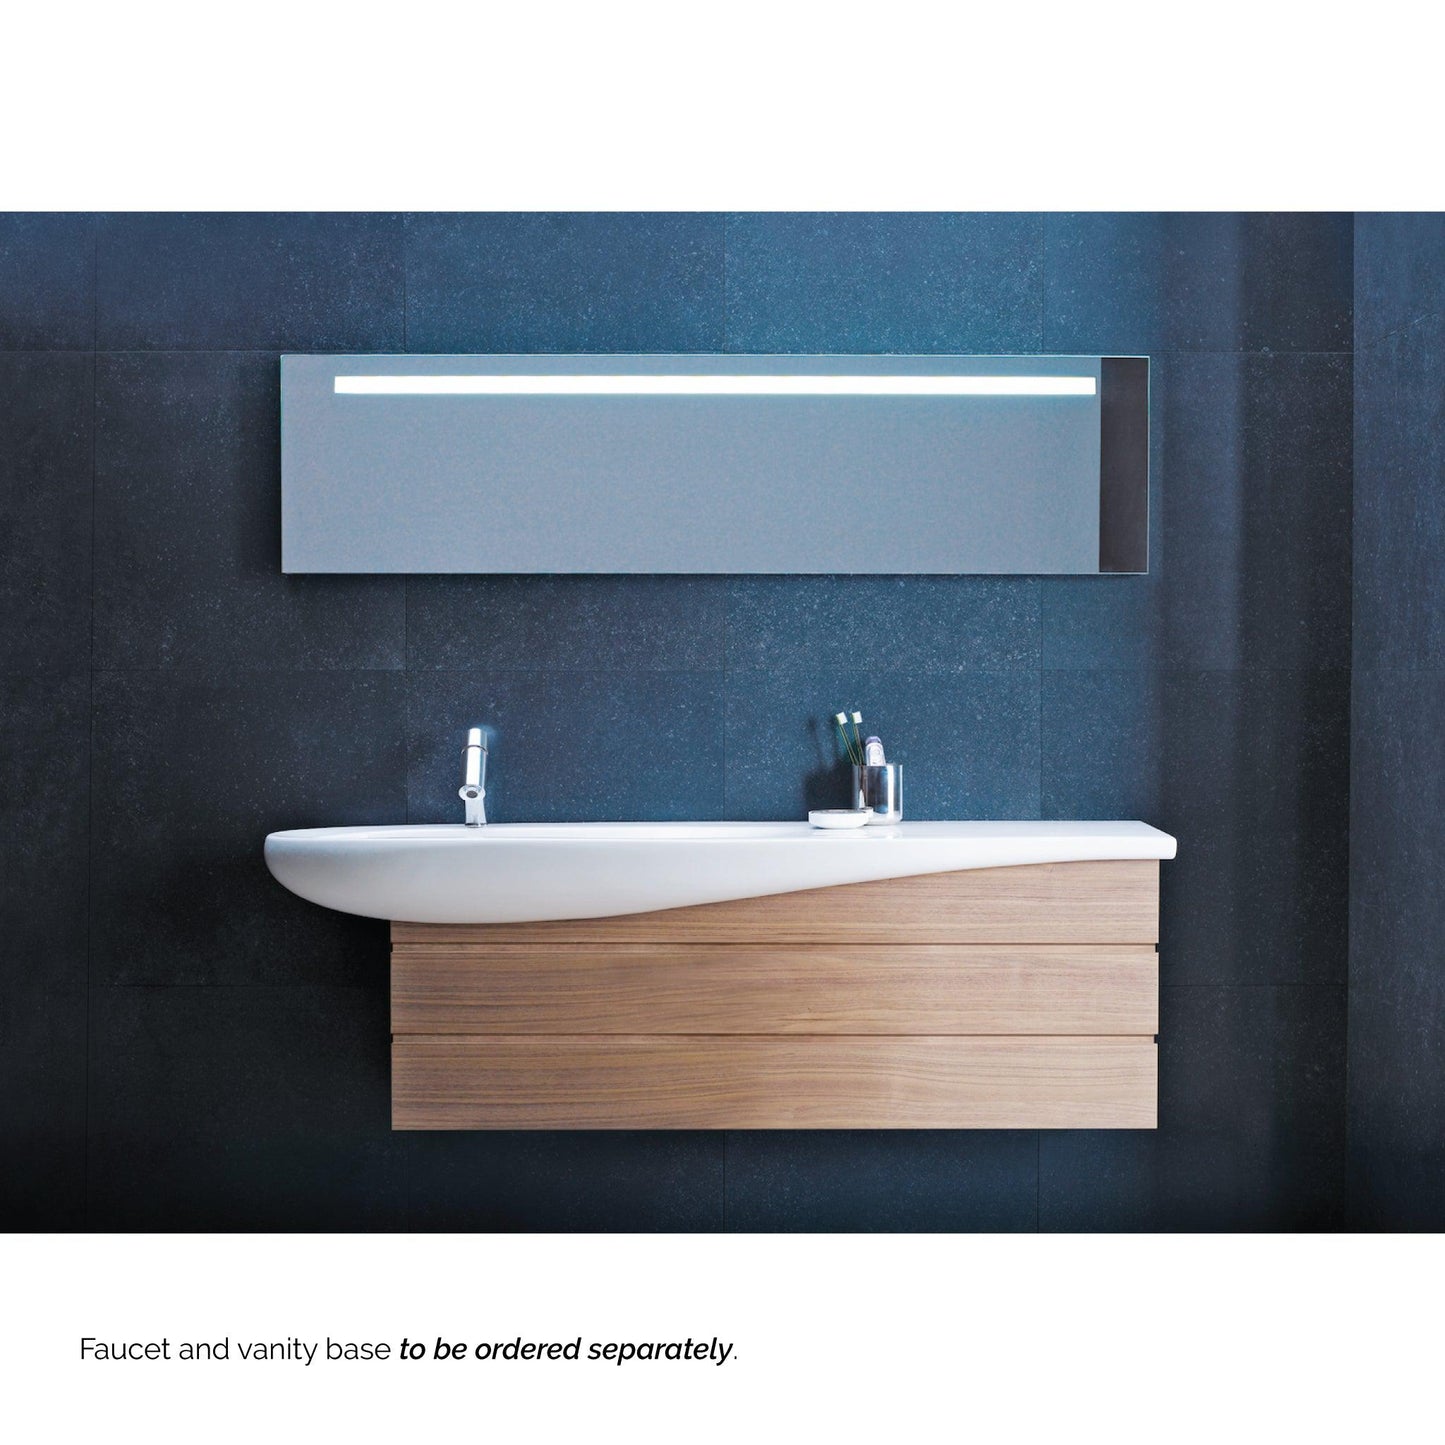 Laufen IlBagnoAlessi 62" x 20" White Wall-Mounted Shelf-Right Bathroom Sink With Faucet Hole